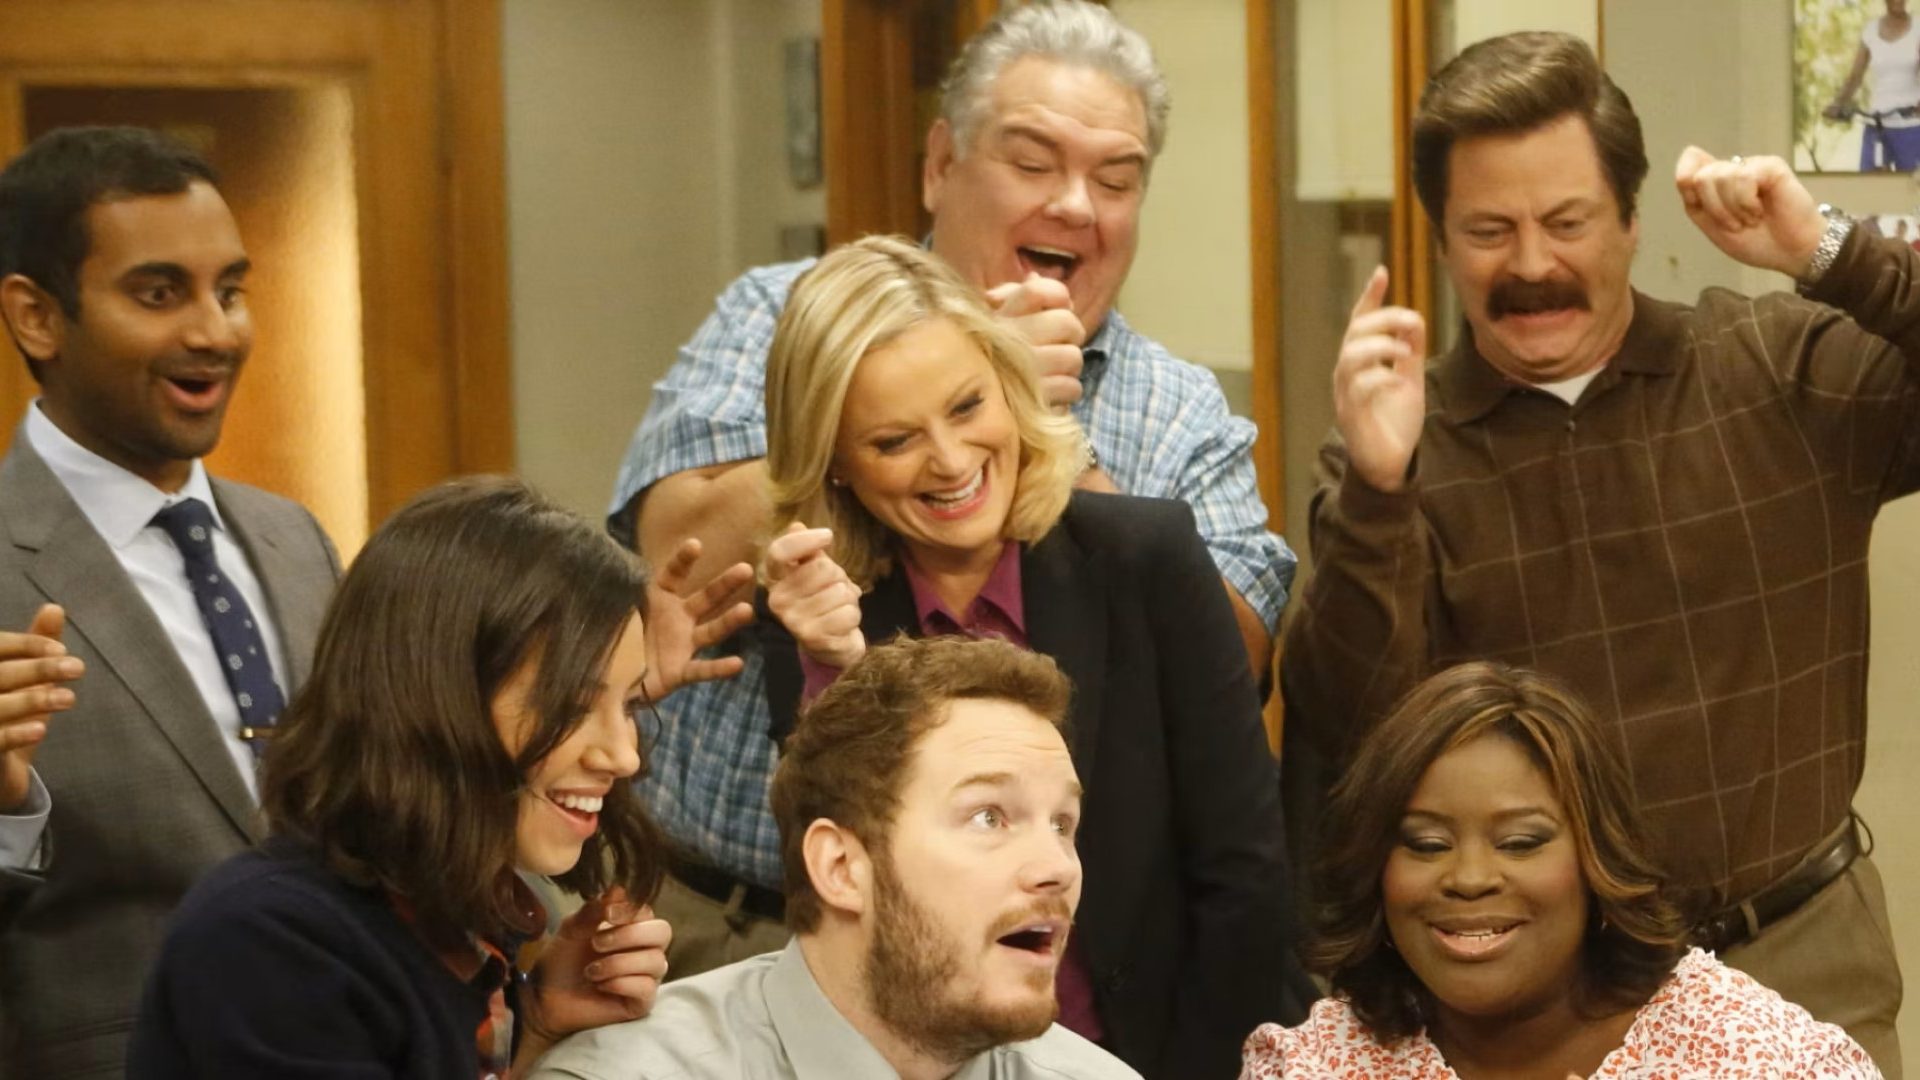 July 12: Parks and Recreation (season 7) - Amazon Prime